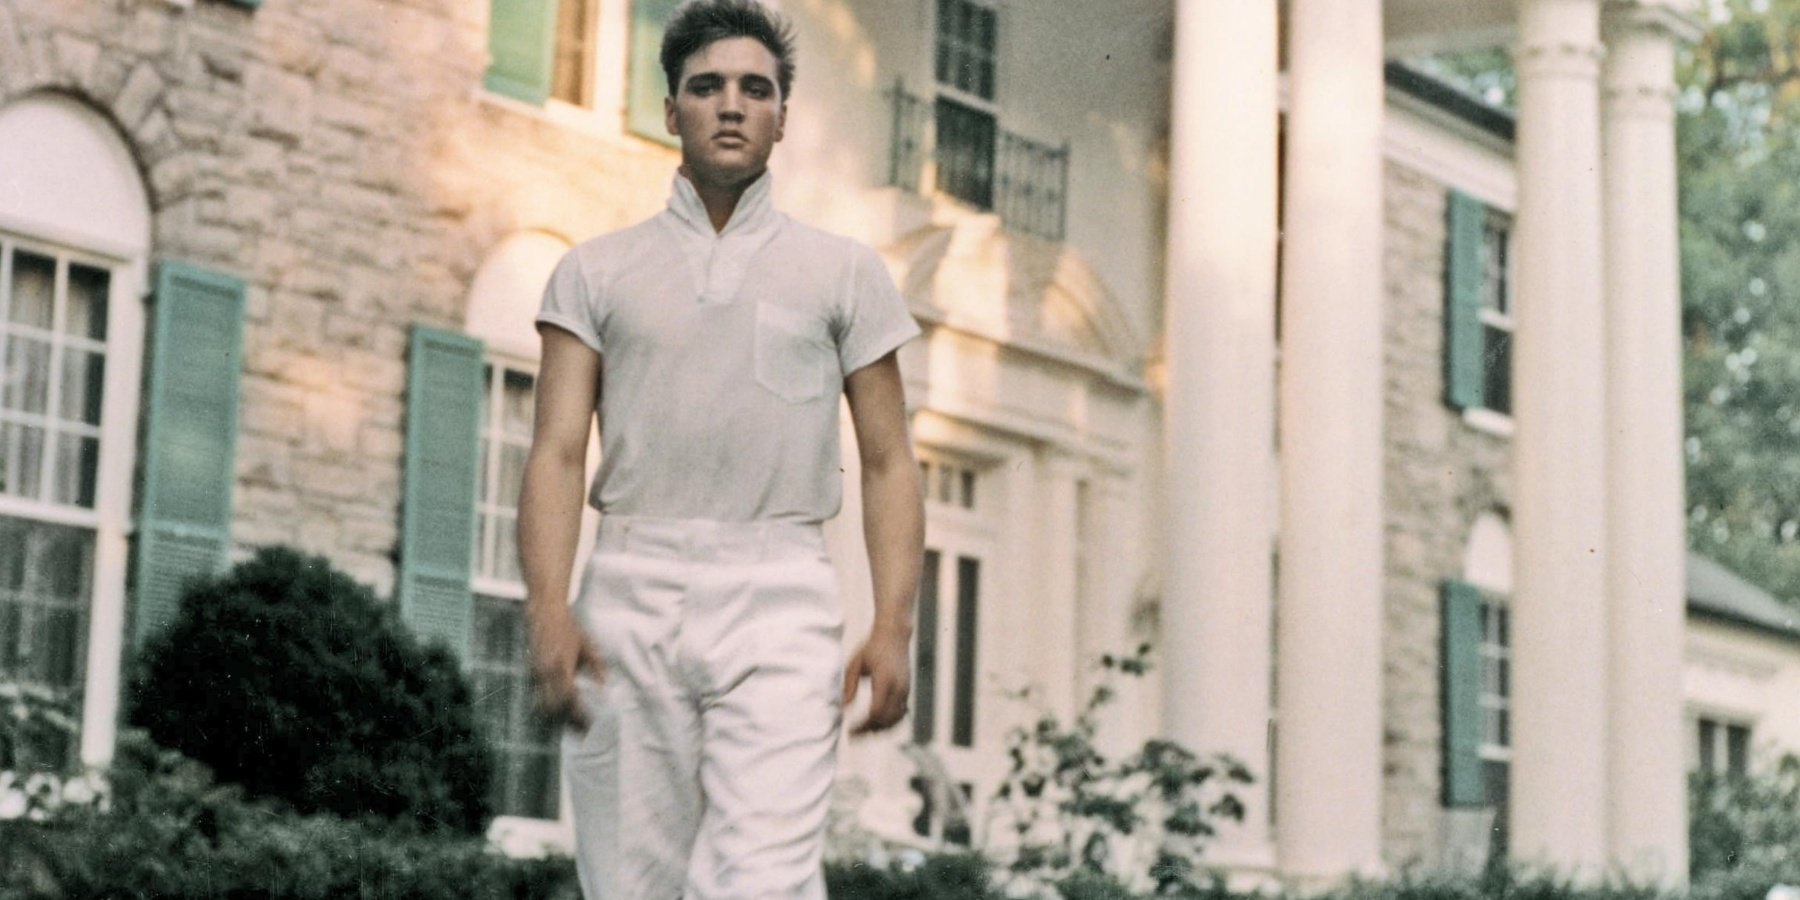 Elvis Presley poses outside of his beloved Graceland home, where his birthday is celebrated every year.